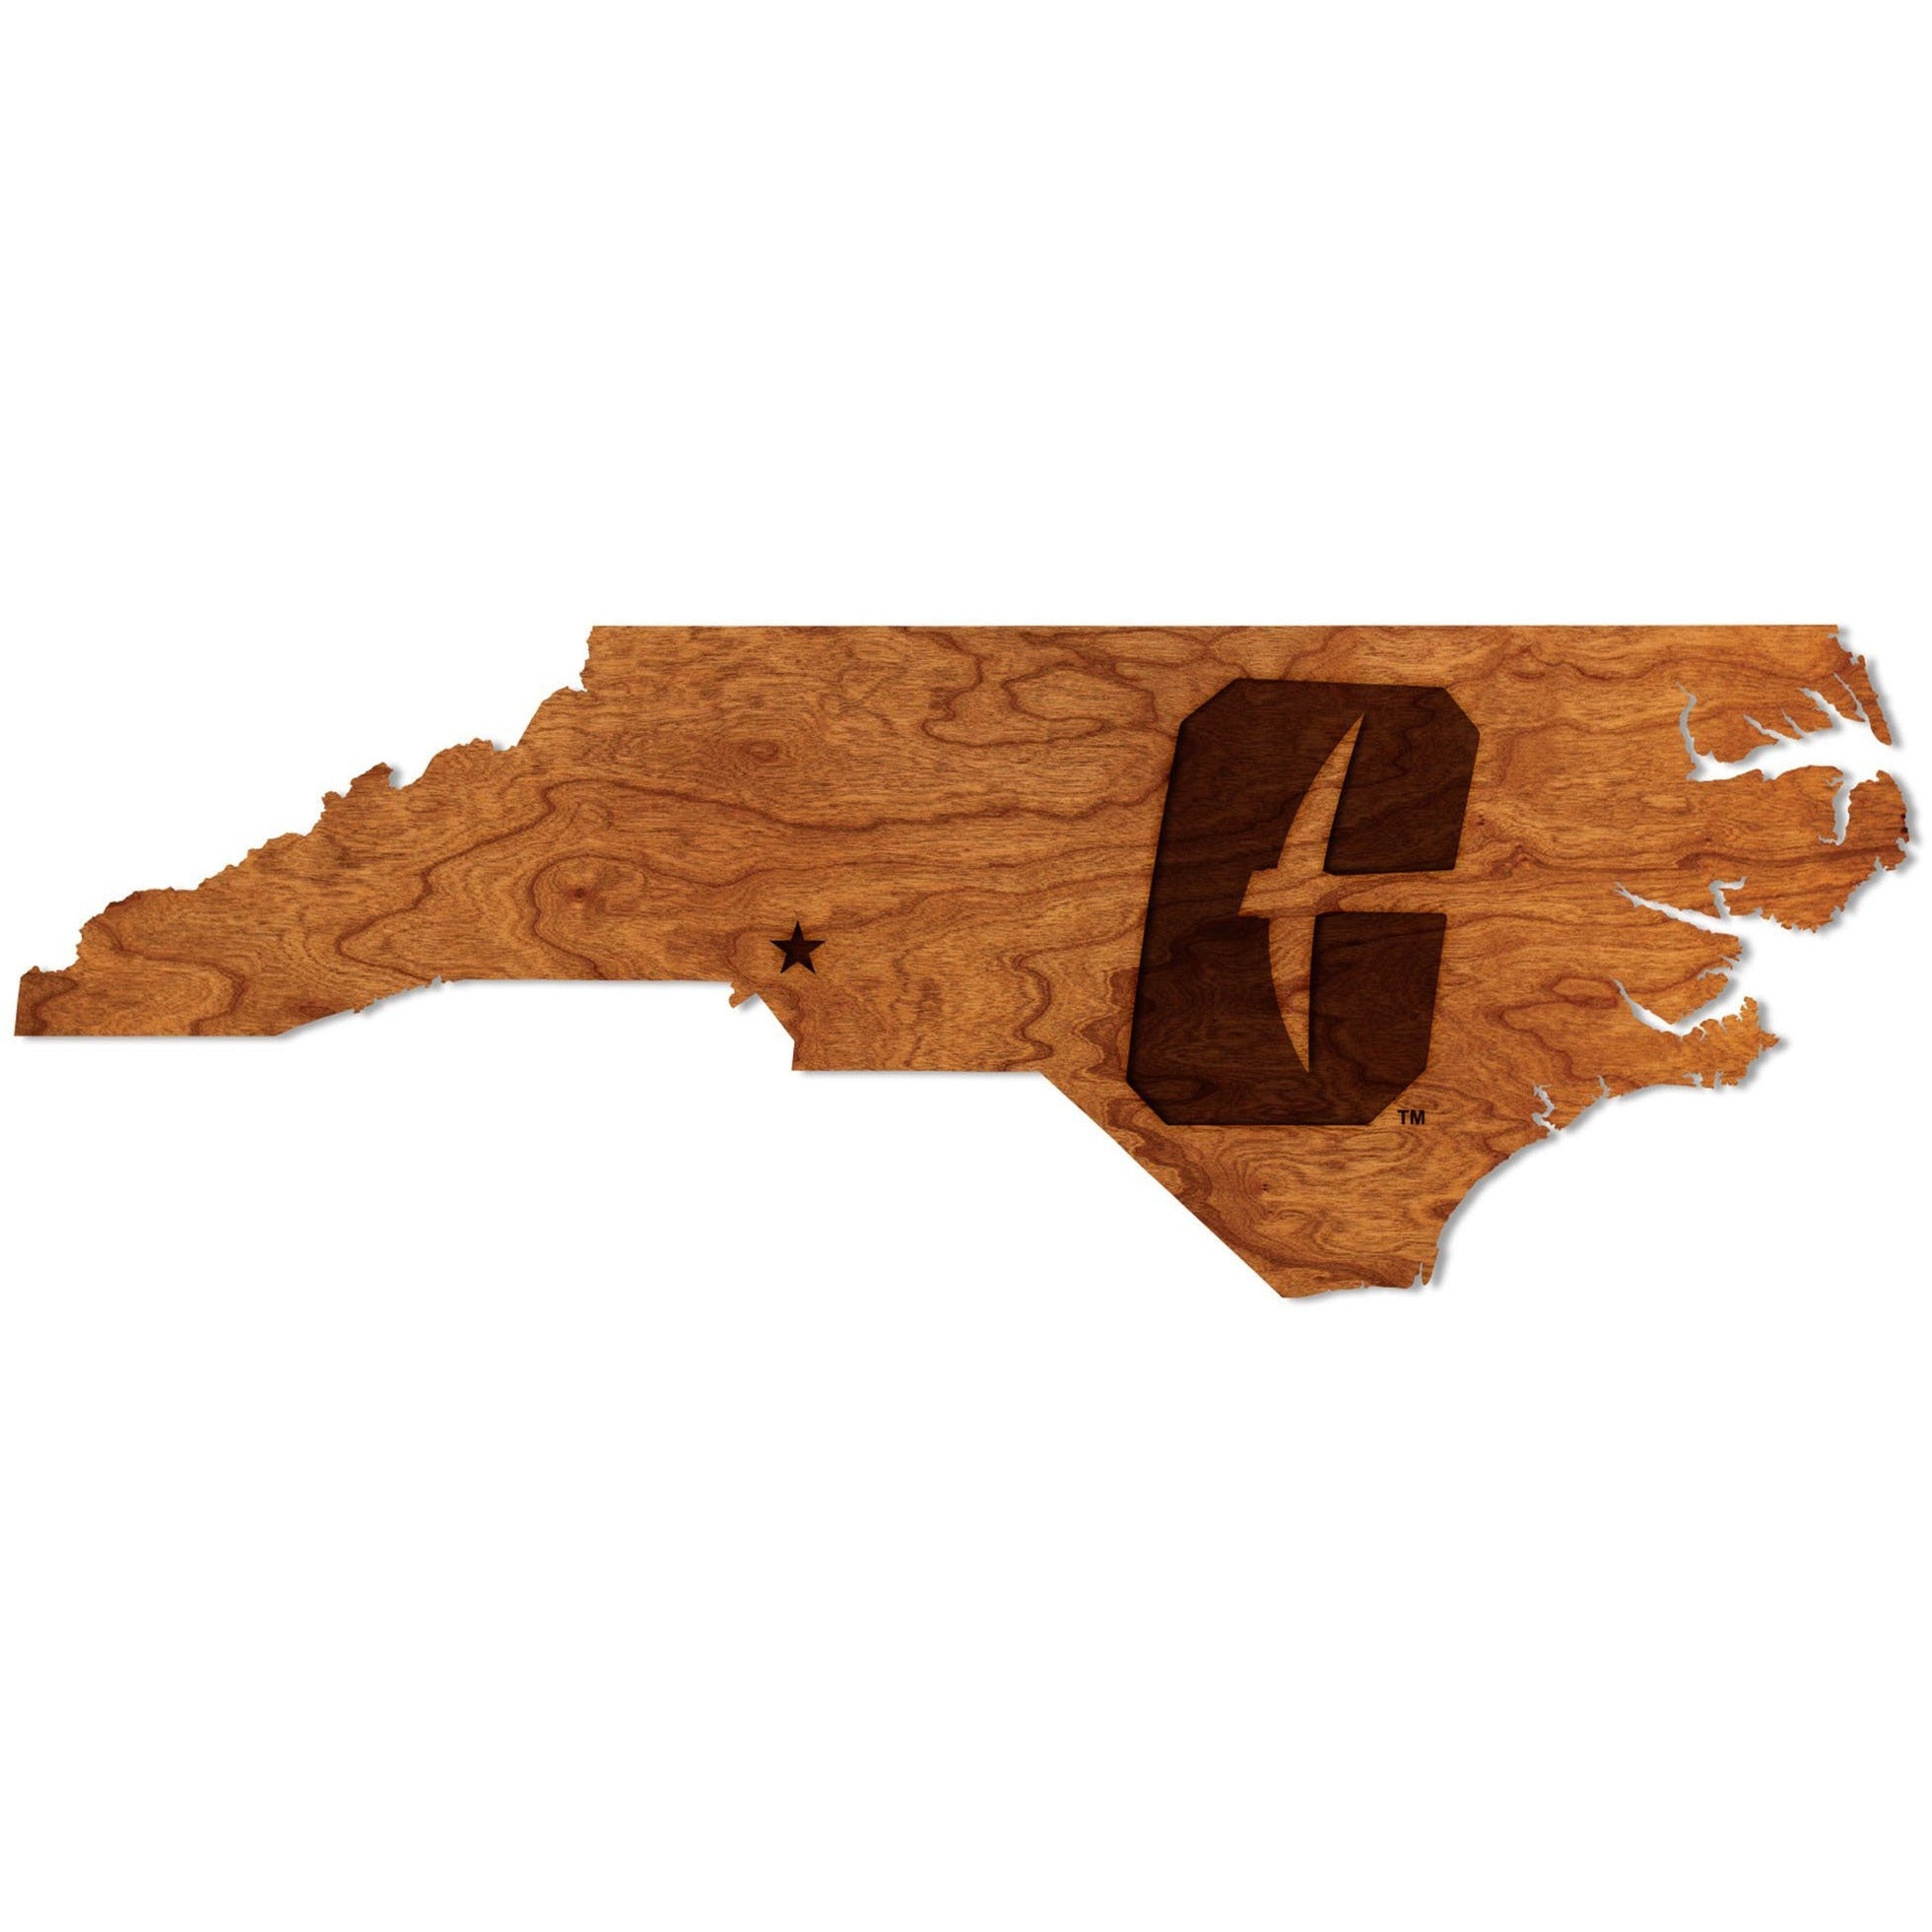 Big Wood Boards - Bread Boards - Charlotte's Web Monogramming & Gifts